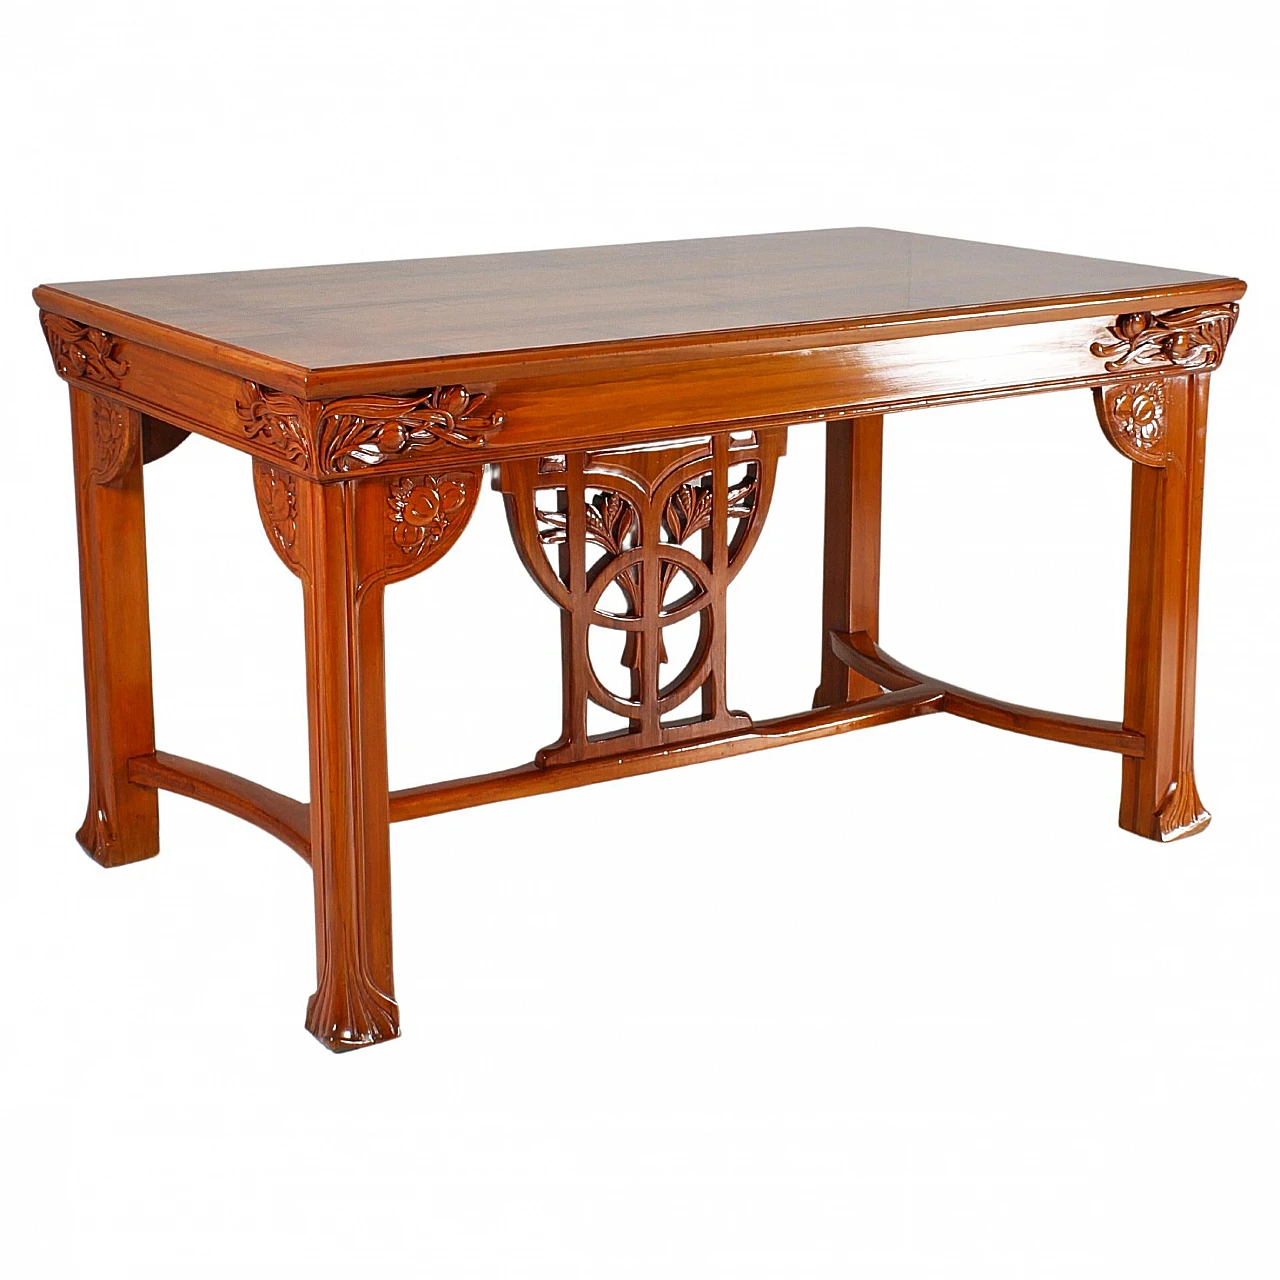 Inlaid & carved wooden table with floral decor by V. Ducrot 1